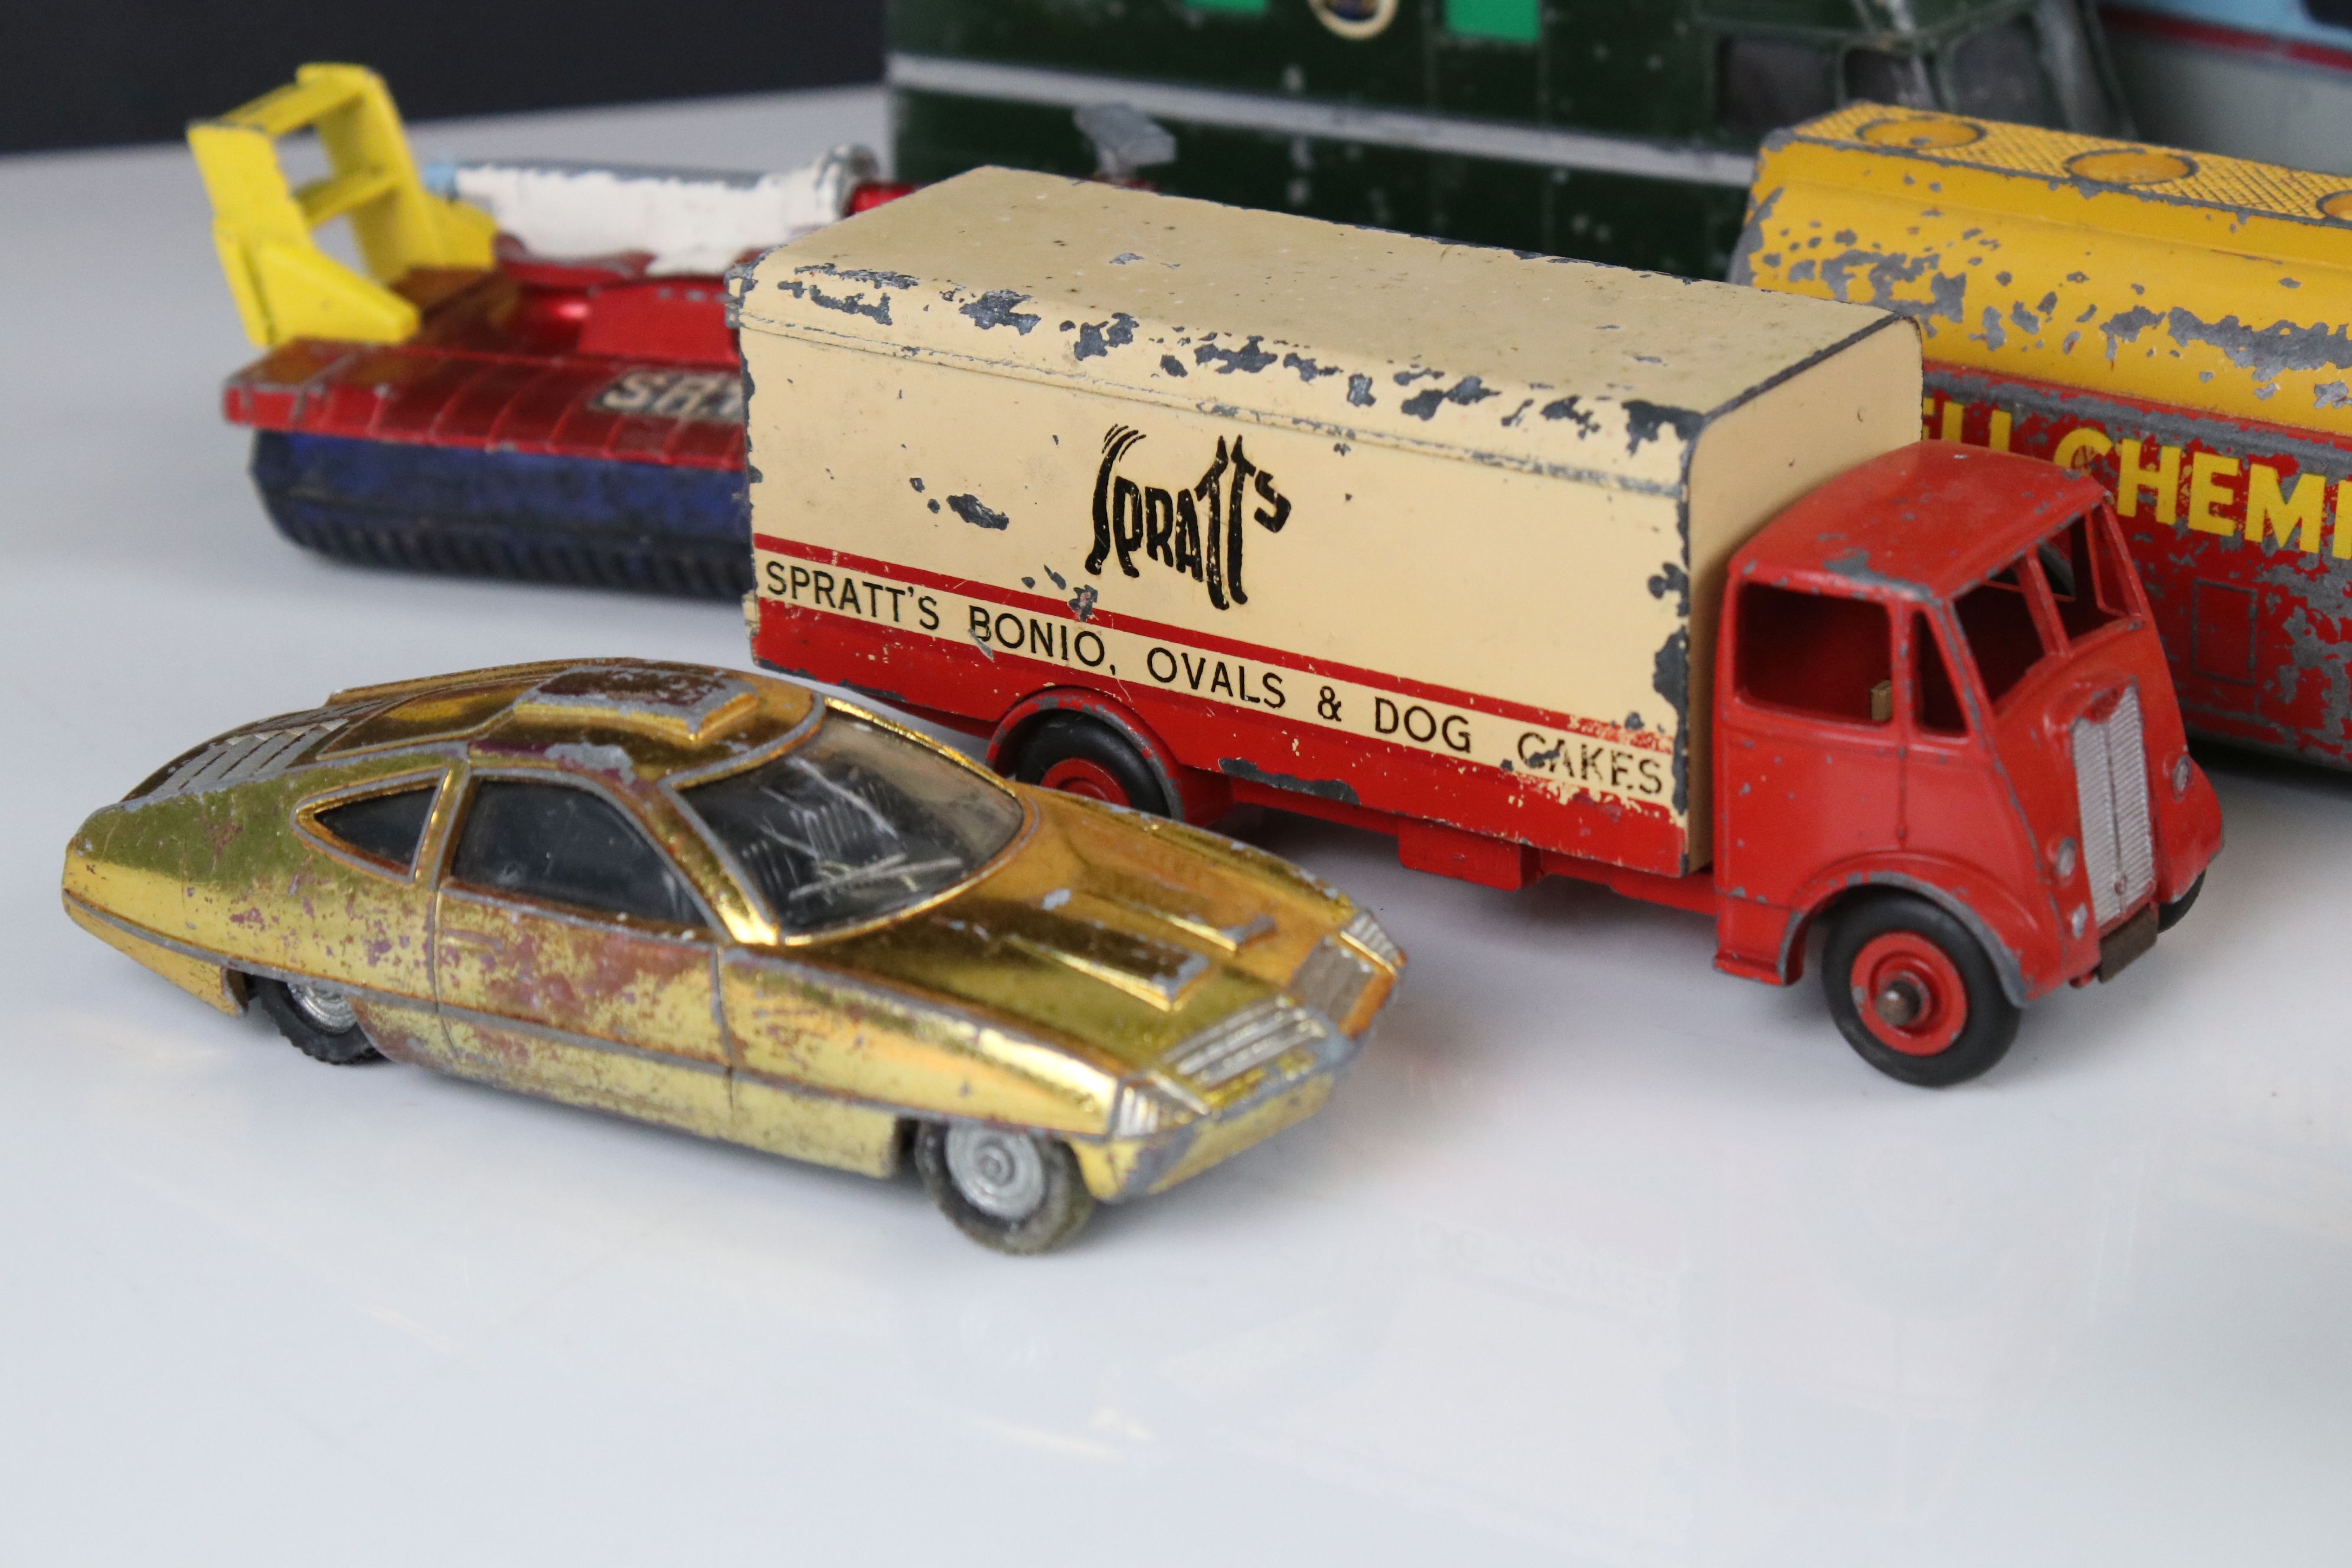 15 play worn mid 20th diecast models to include TV Mobile Control Room, 967 BBC TV Mobile Control - Image 5 of 15